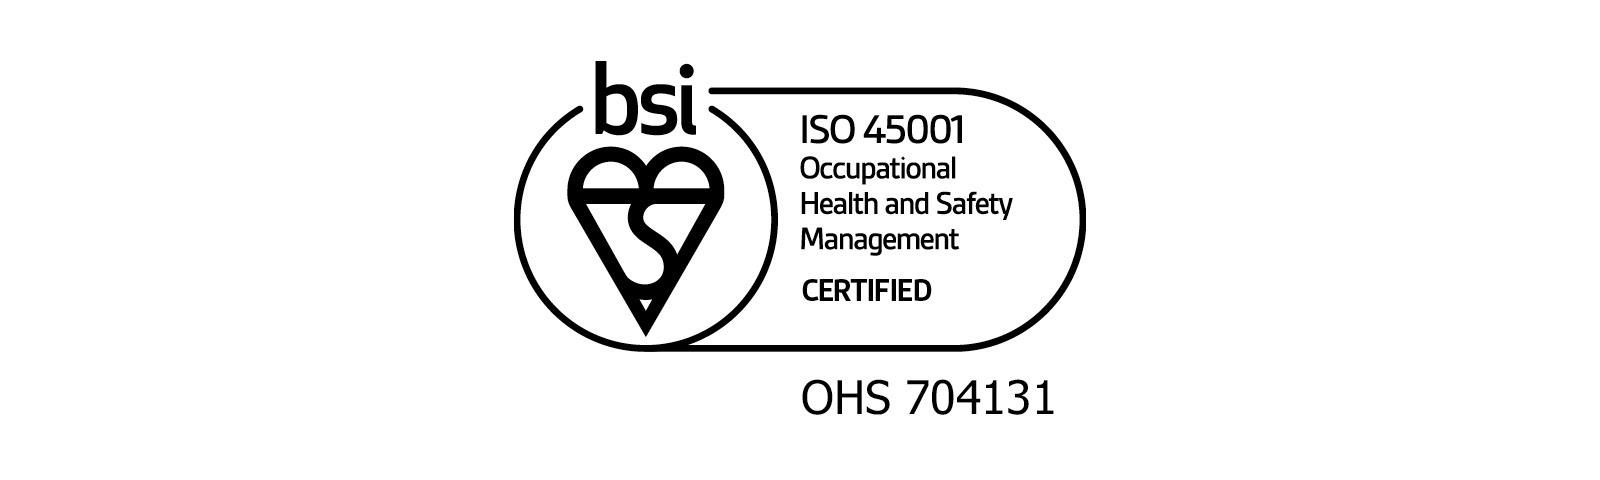 ISO 45001:2018 Occupational Health and Safety Management System